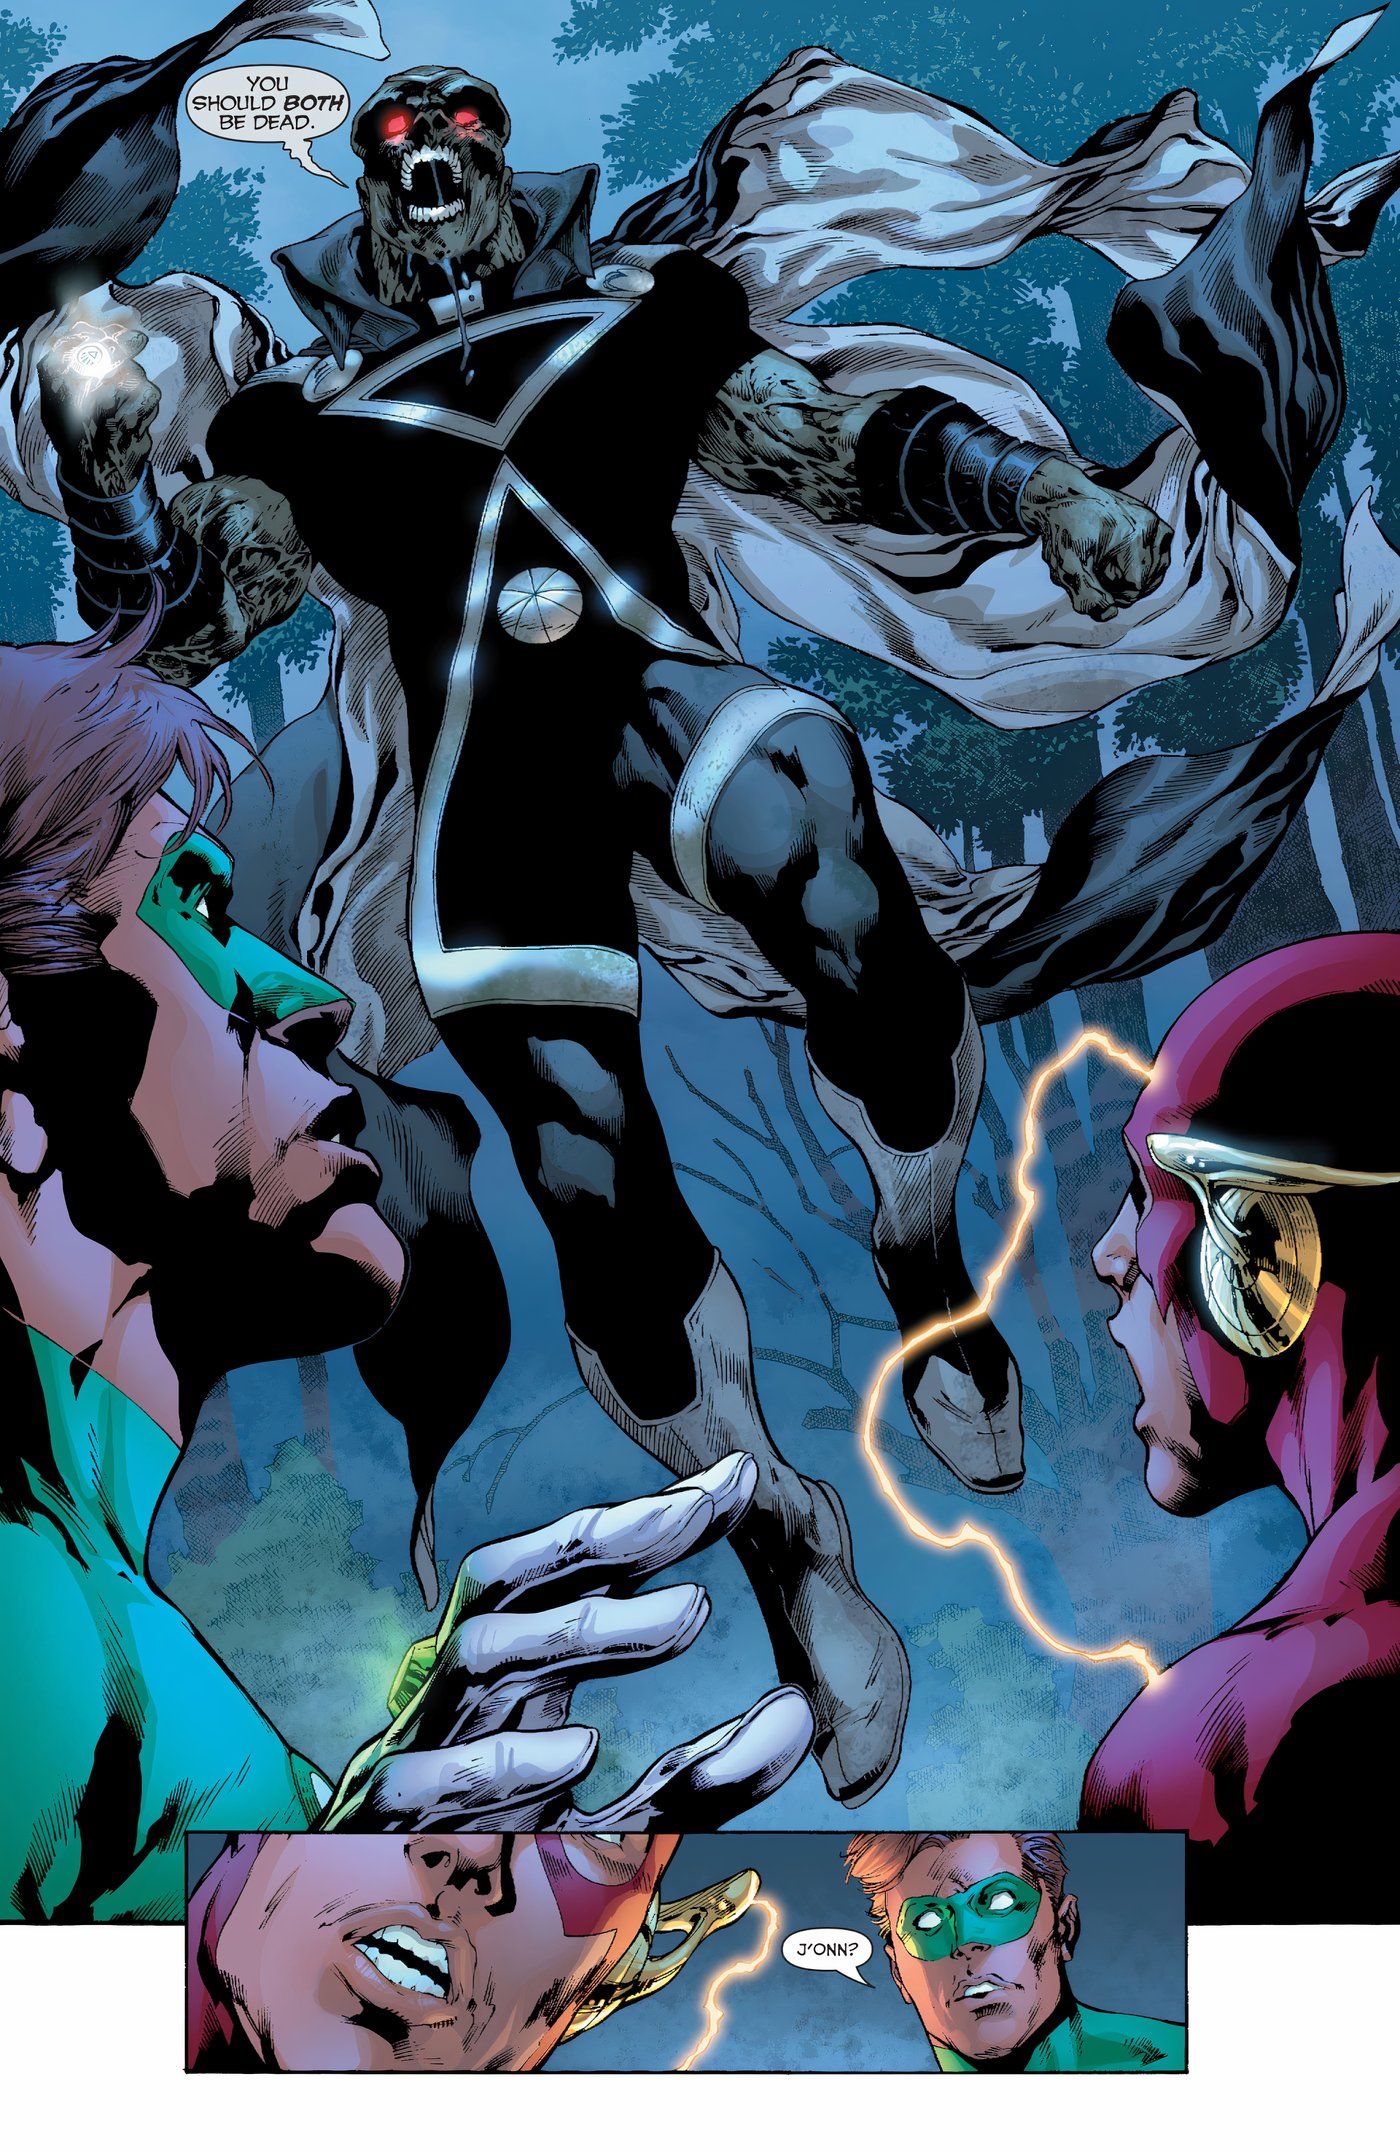 Green Lantern And The FLash Are Attacked By Zombie Martian Manhunter